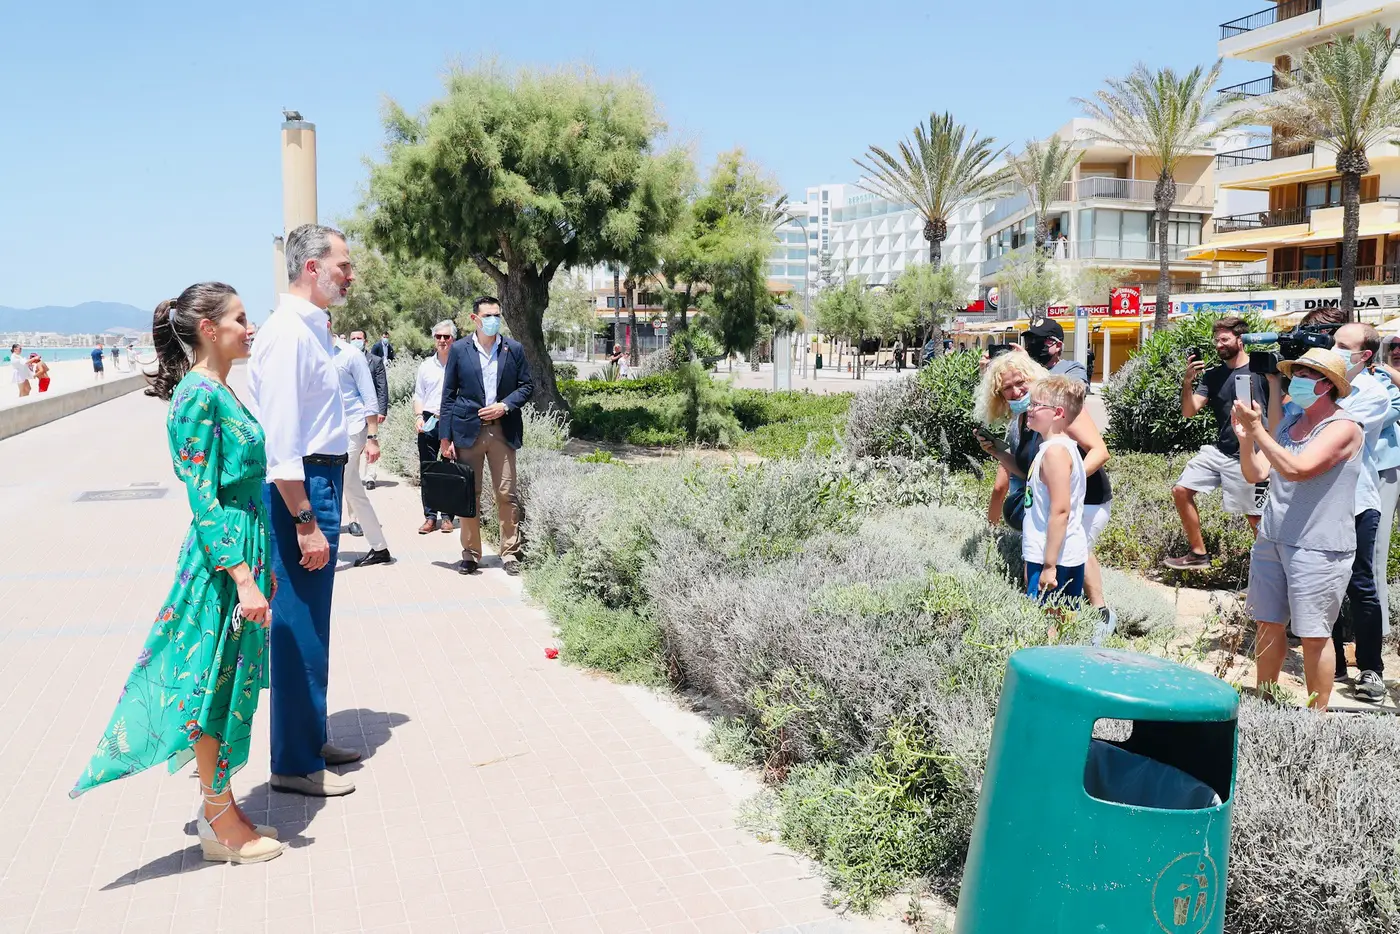 King Felipe and Queen Letizia of Spain talk with some tourists during their walk along the promenade in Palma